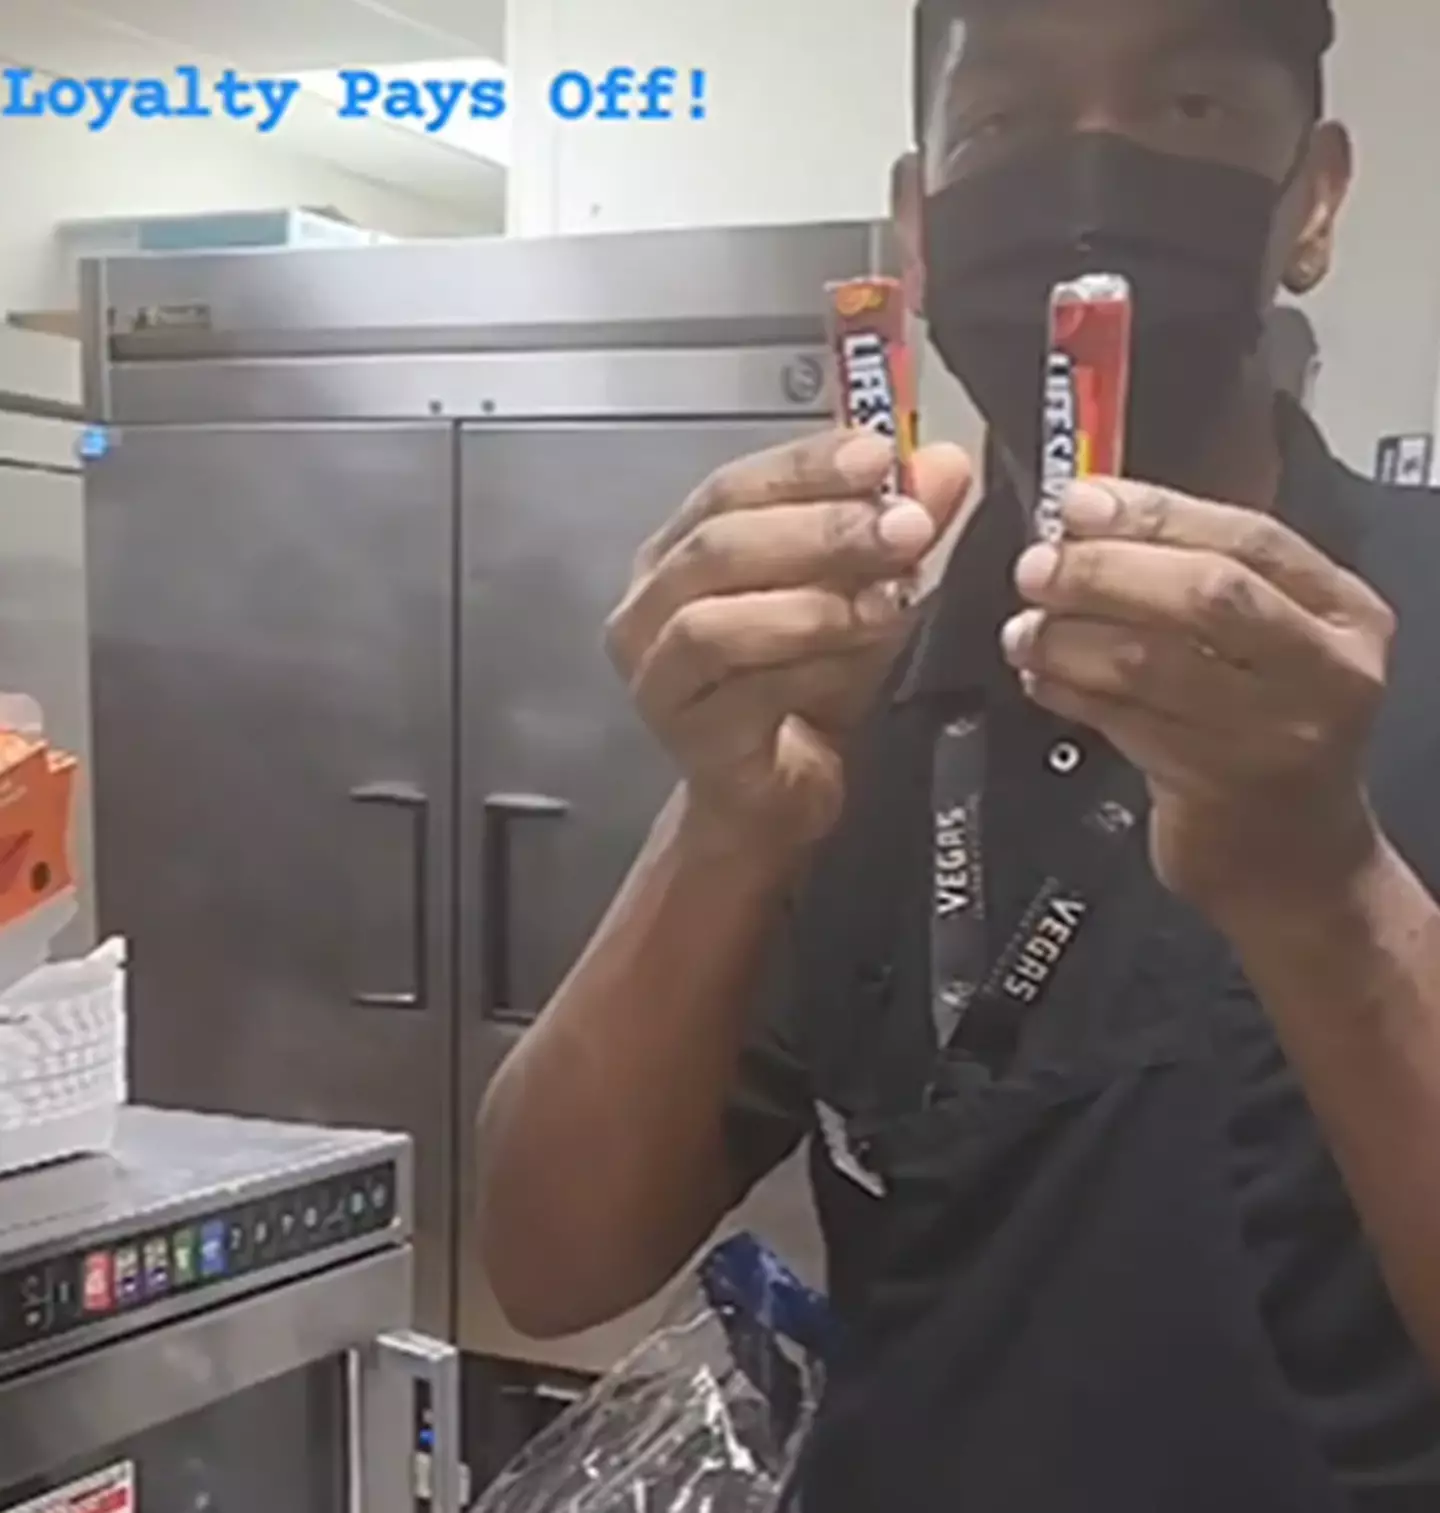 A Burger King employee received a rather sub-par goodie bag after a whopping 27 years in service.